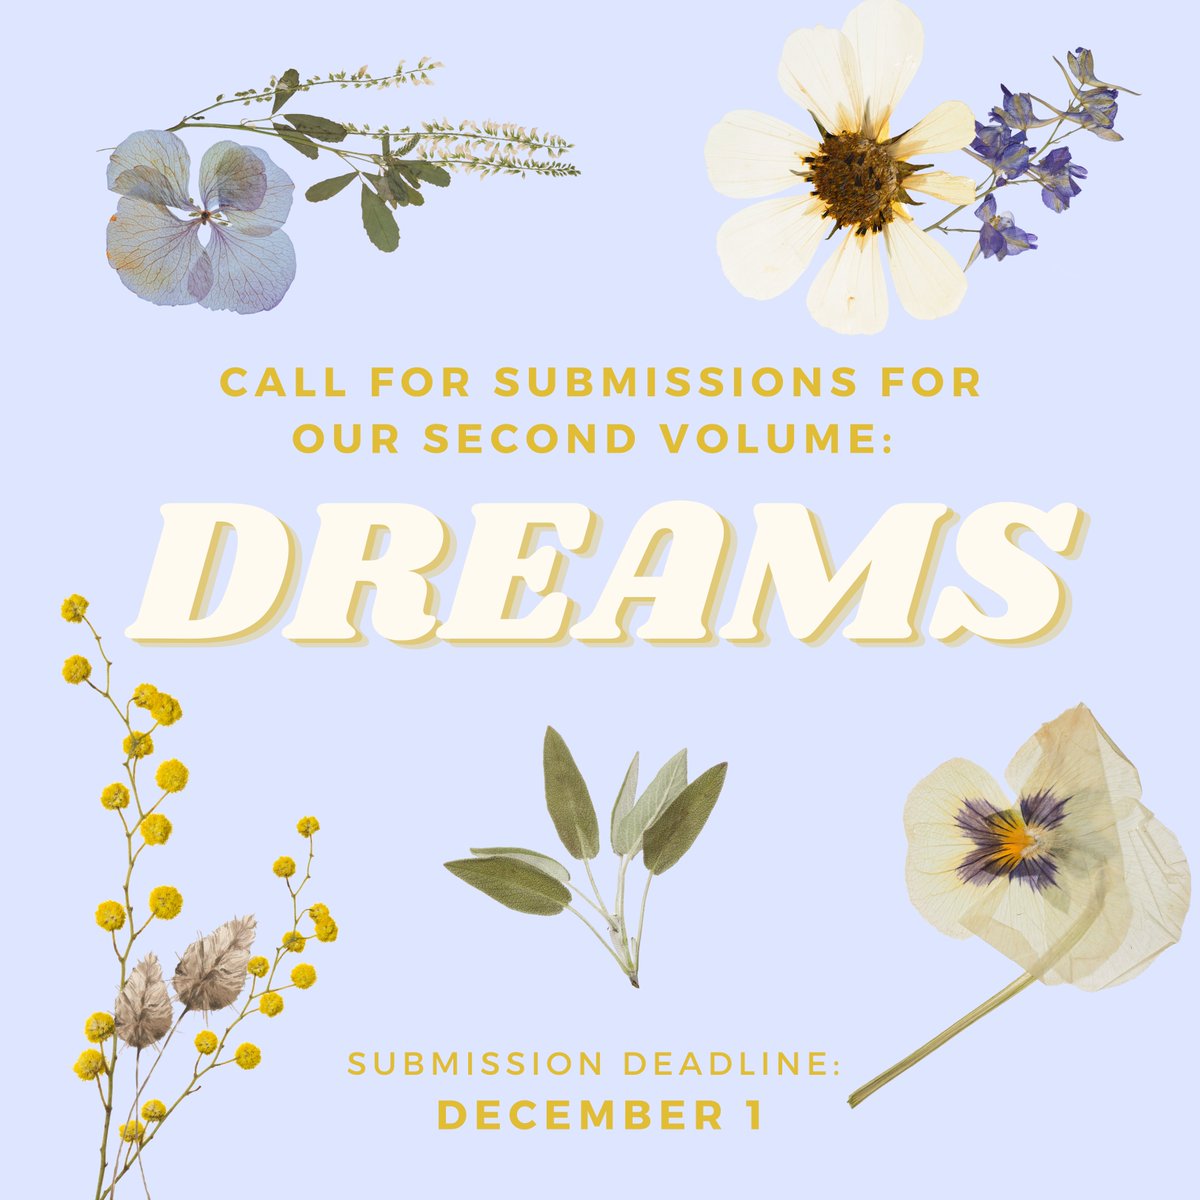 Calling all creatives! Ghost Girls is opening submissions for our 2nd volume, Dreams. We are looking for poetry, writing, visual art, and descriptions of your #dreams! Submit via the link in our bio, deadline is Dec 1st! 

#poetry #submissionsopen #opensubs #zine #art #writer